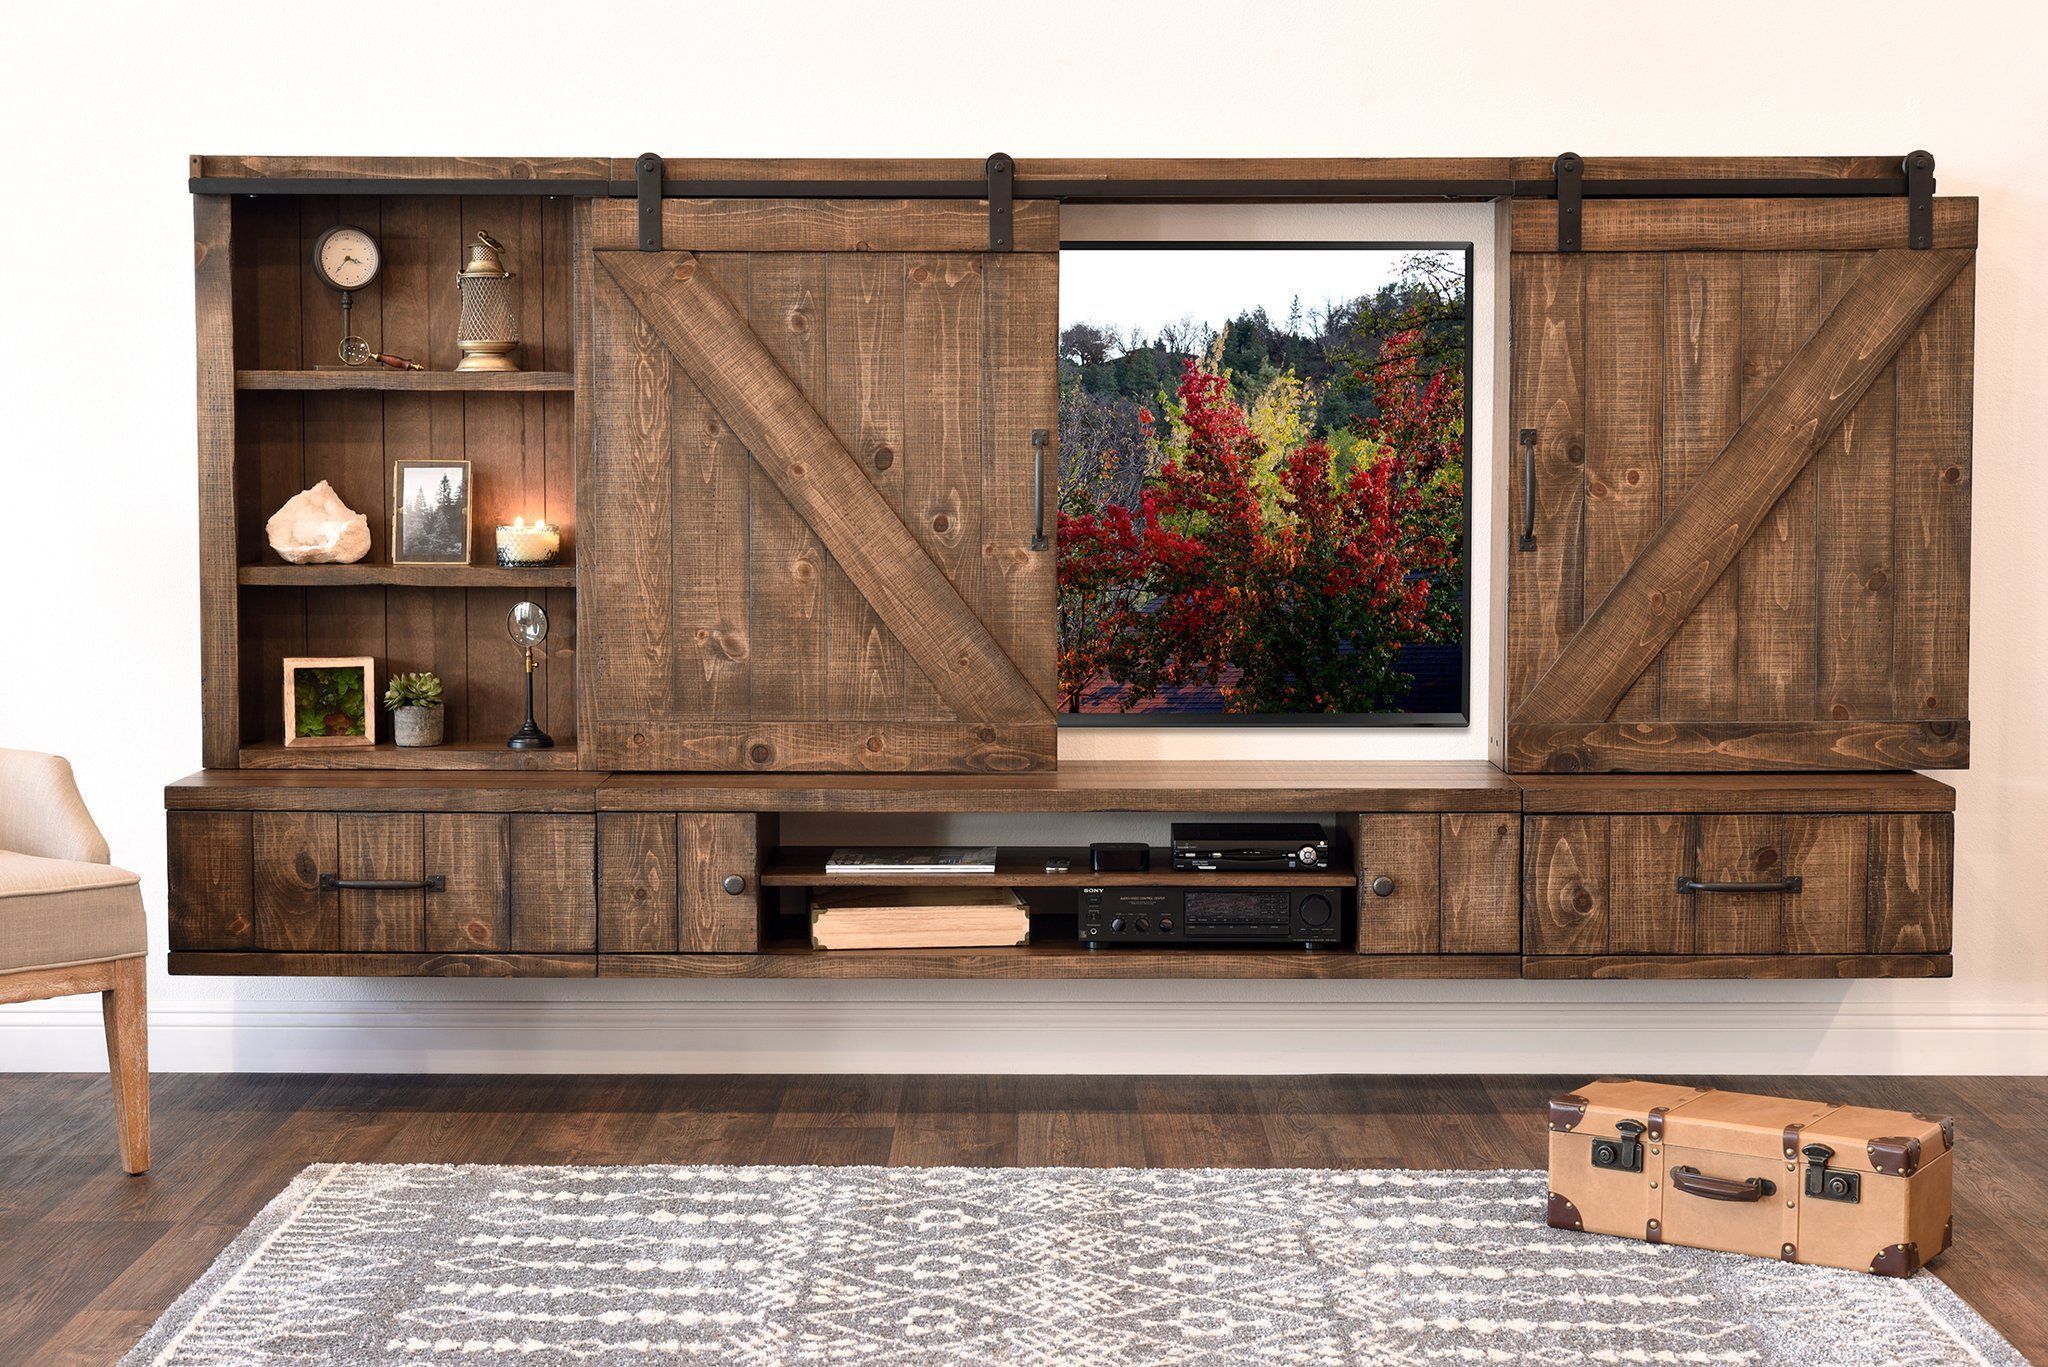 Farmhouse Barn Door Entertainment Center Floating Tv Stand – Spice For Farmhouse Stands With Shelves (Gallery 9 of 20)